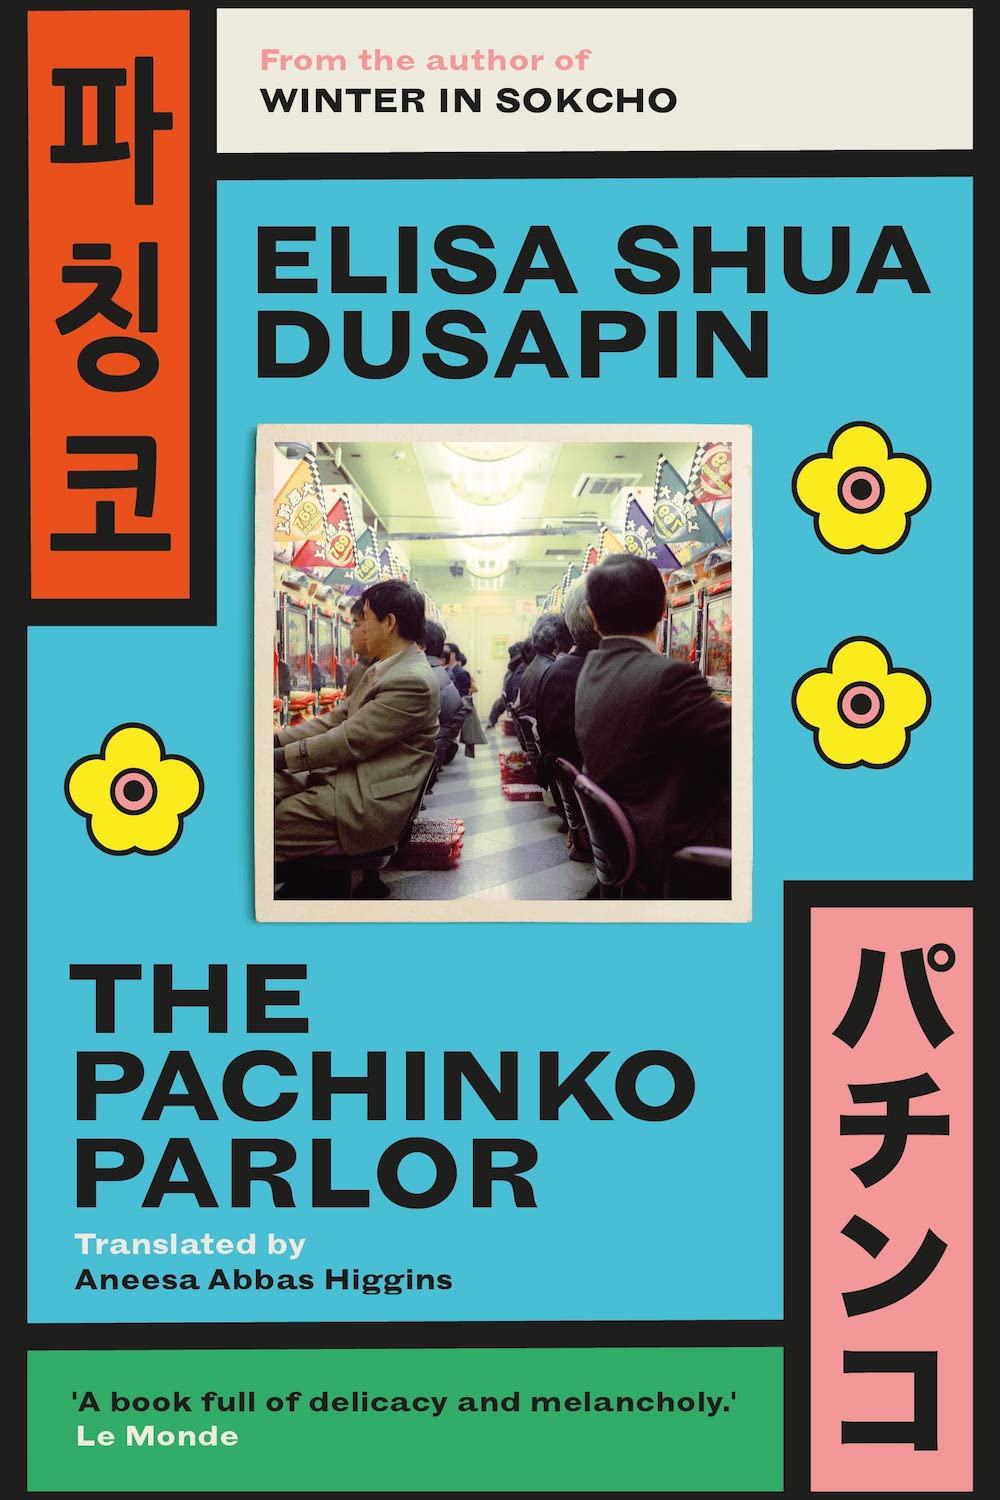 book cover image for elisa shua dusapin novel the pachinko parlor with janapnese text, yellow flowers against sea blue background and a central image of a pachinko parlor